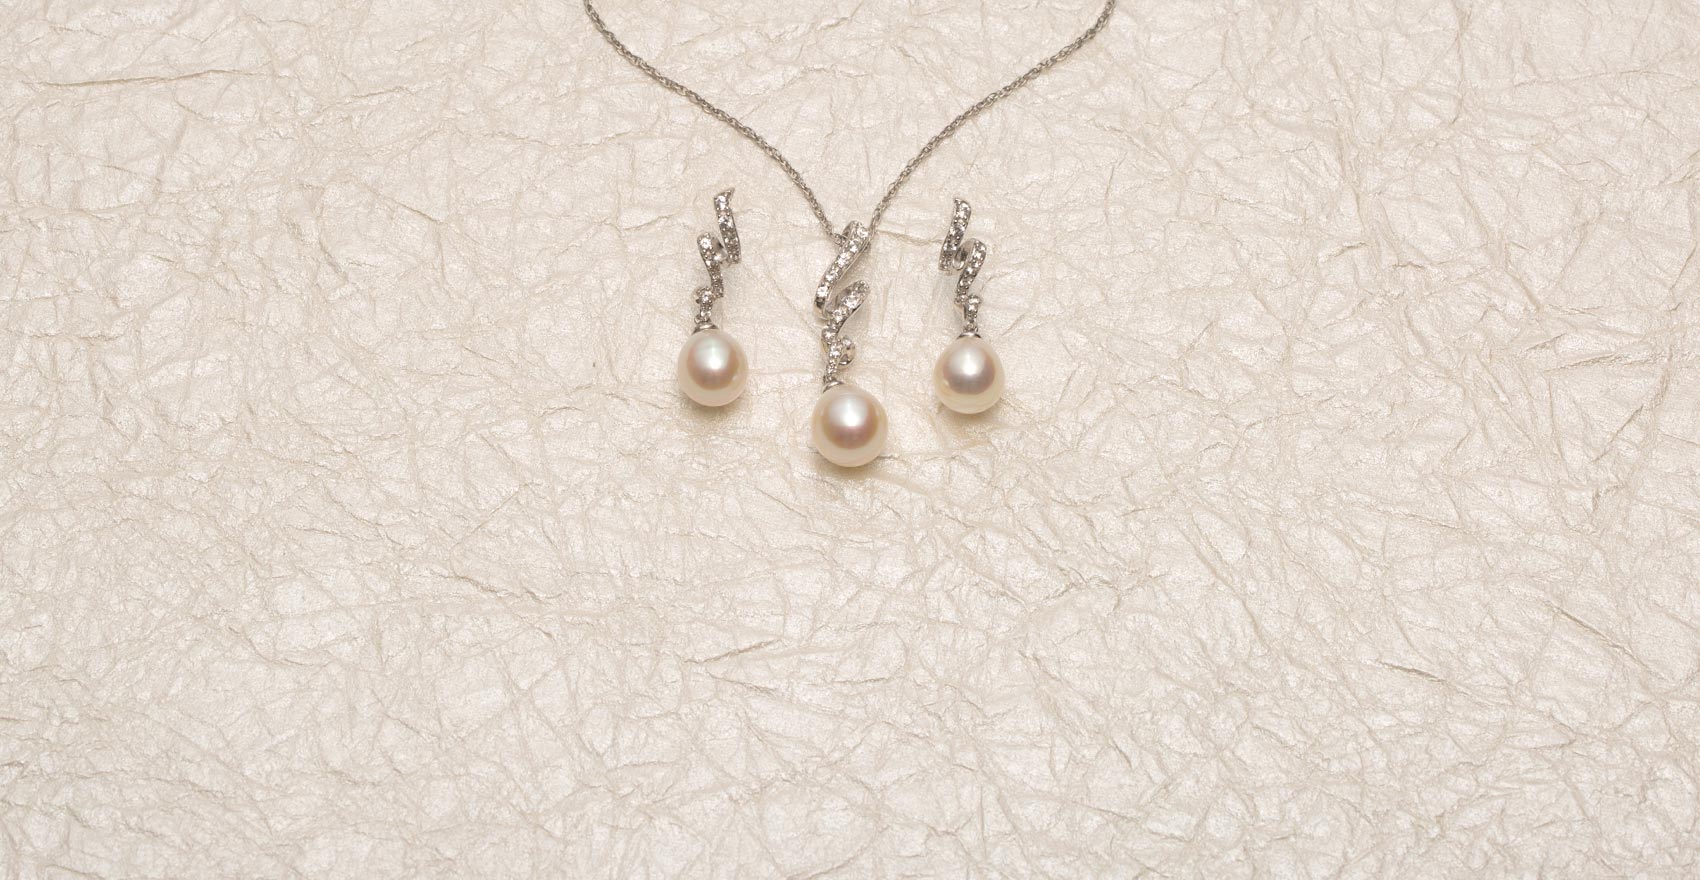 Pearl necklace with matching earrings on an onion-paper background